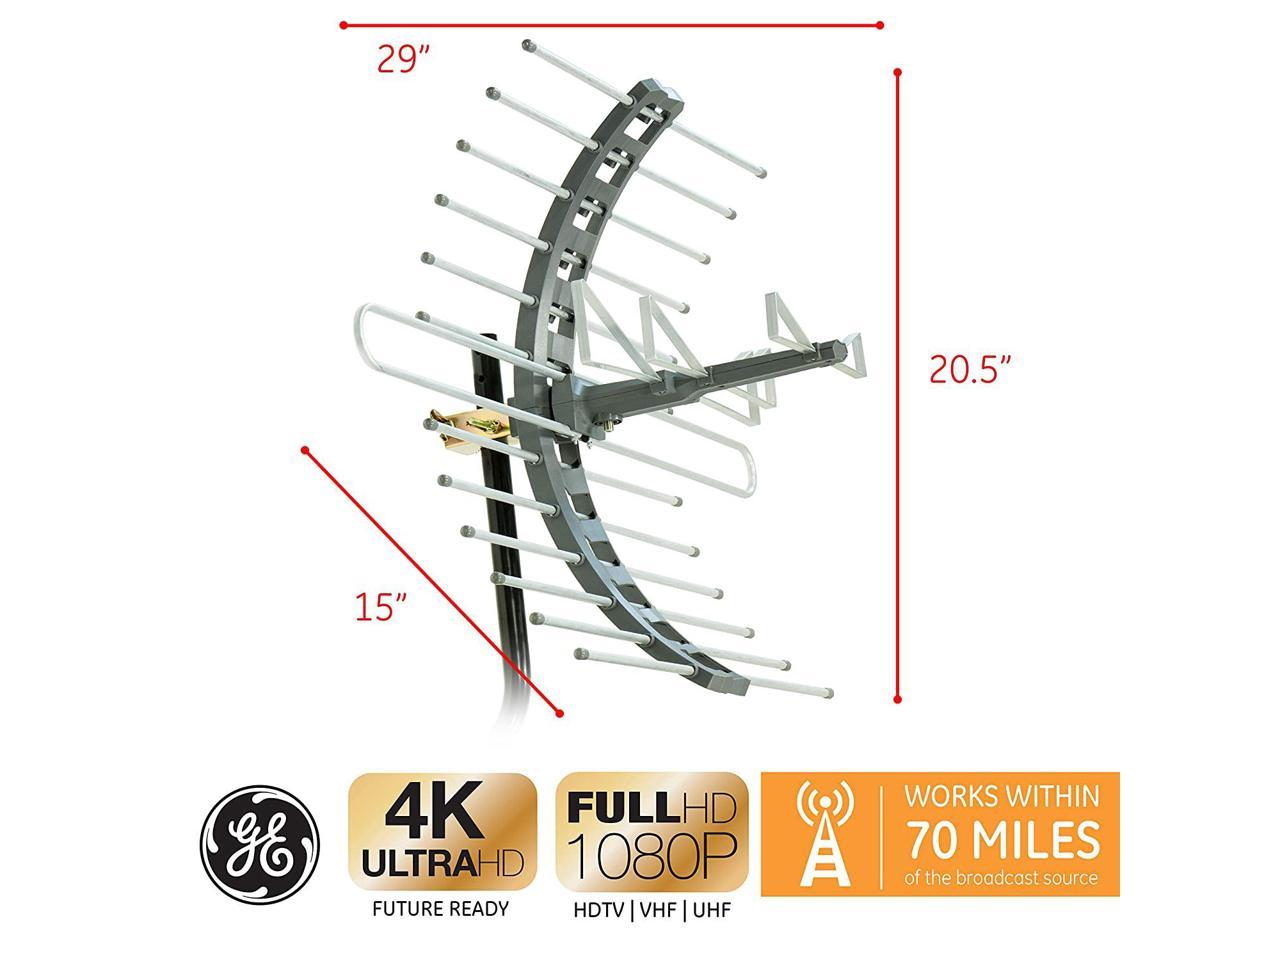 GE 29884 Pro Outdoor//Attic Mount Antenna Long Range with Compact Design Outdoor UHF Channels Attic HDTV Antenna for VHF 70 Mile Range